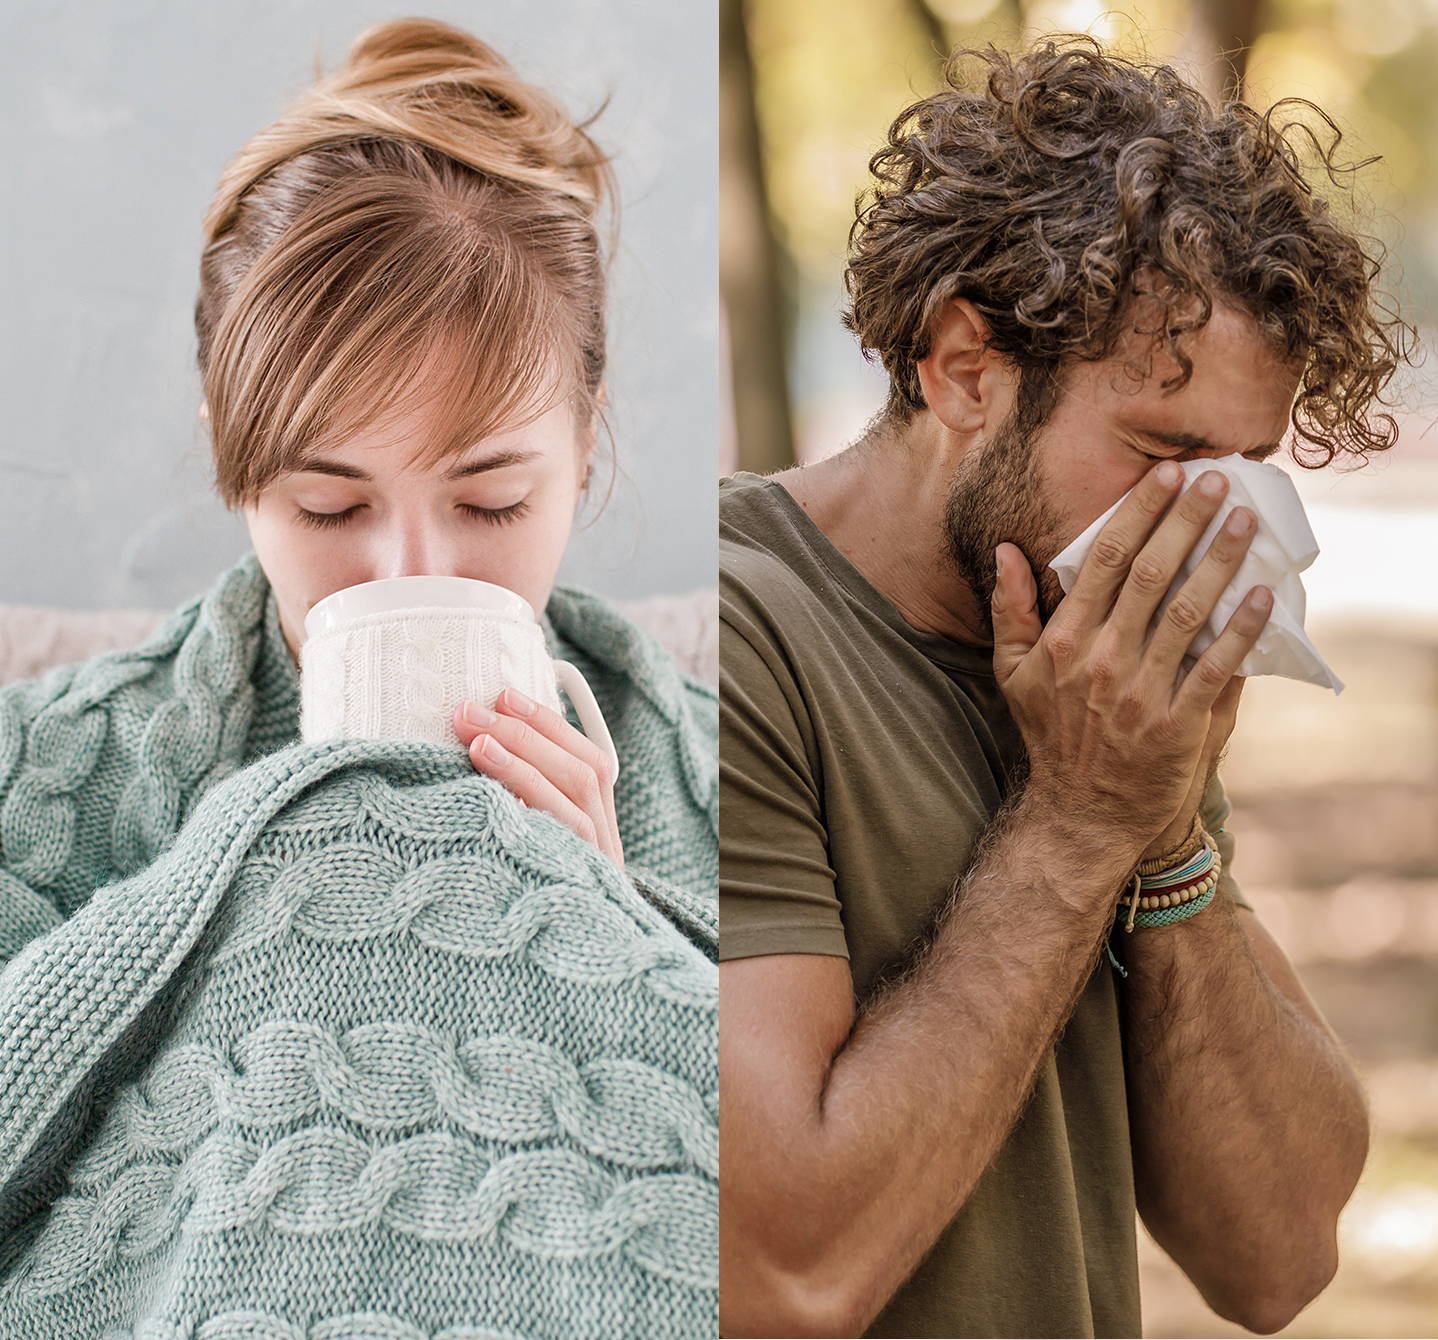 Left, woman with COVID-19 snuggling under a blanket with a hot drink. Right, a man outside blowing his nose due to allergies